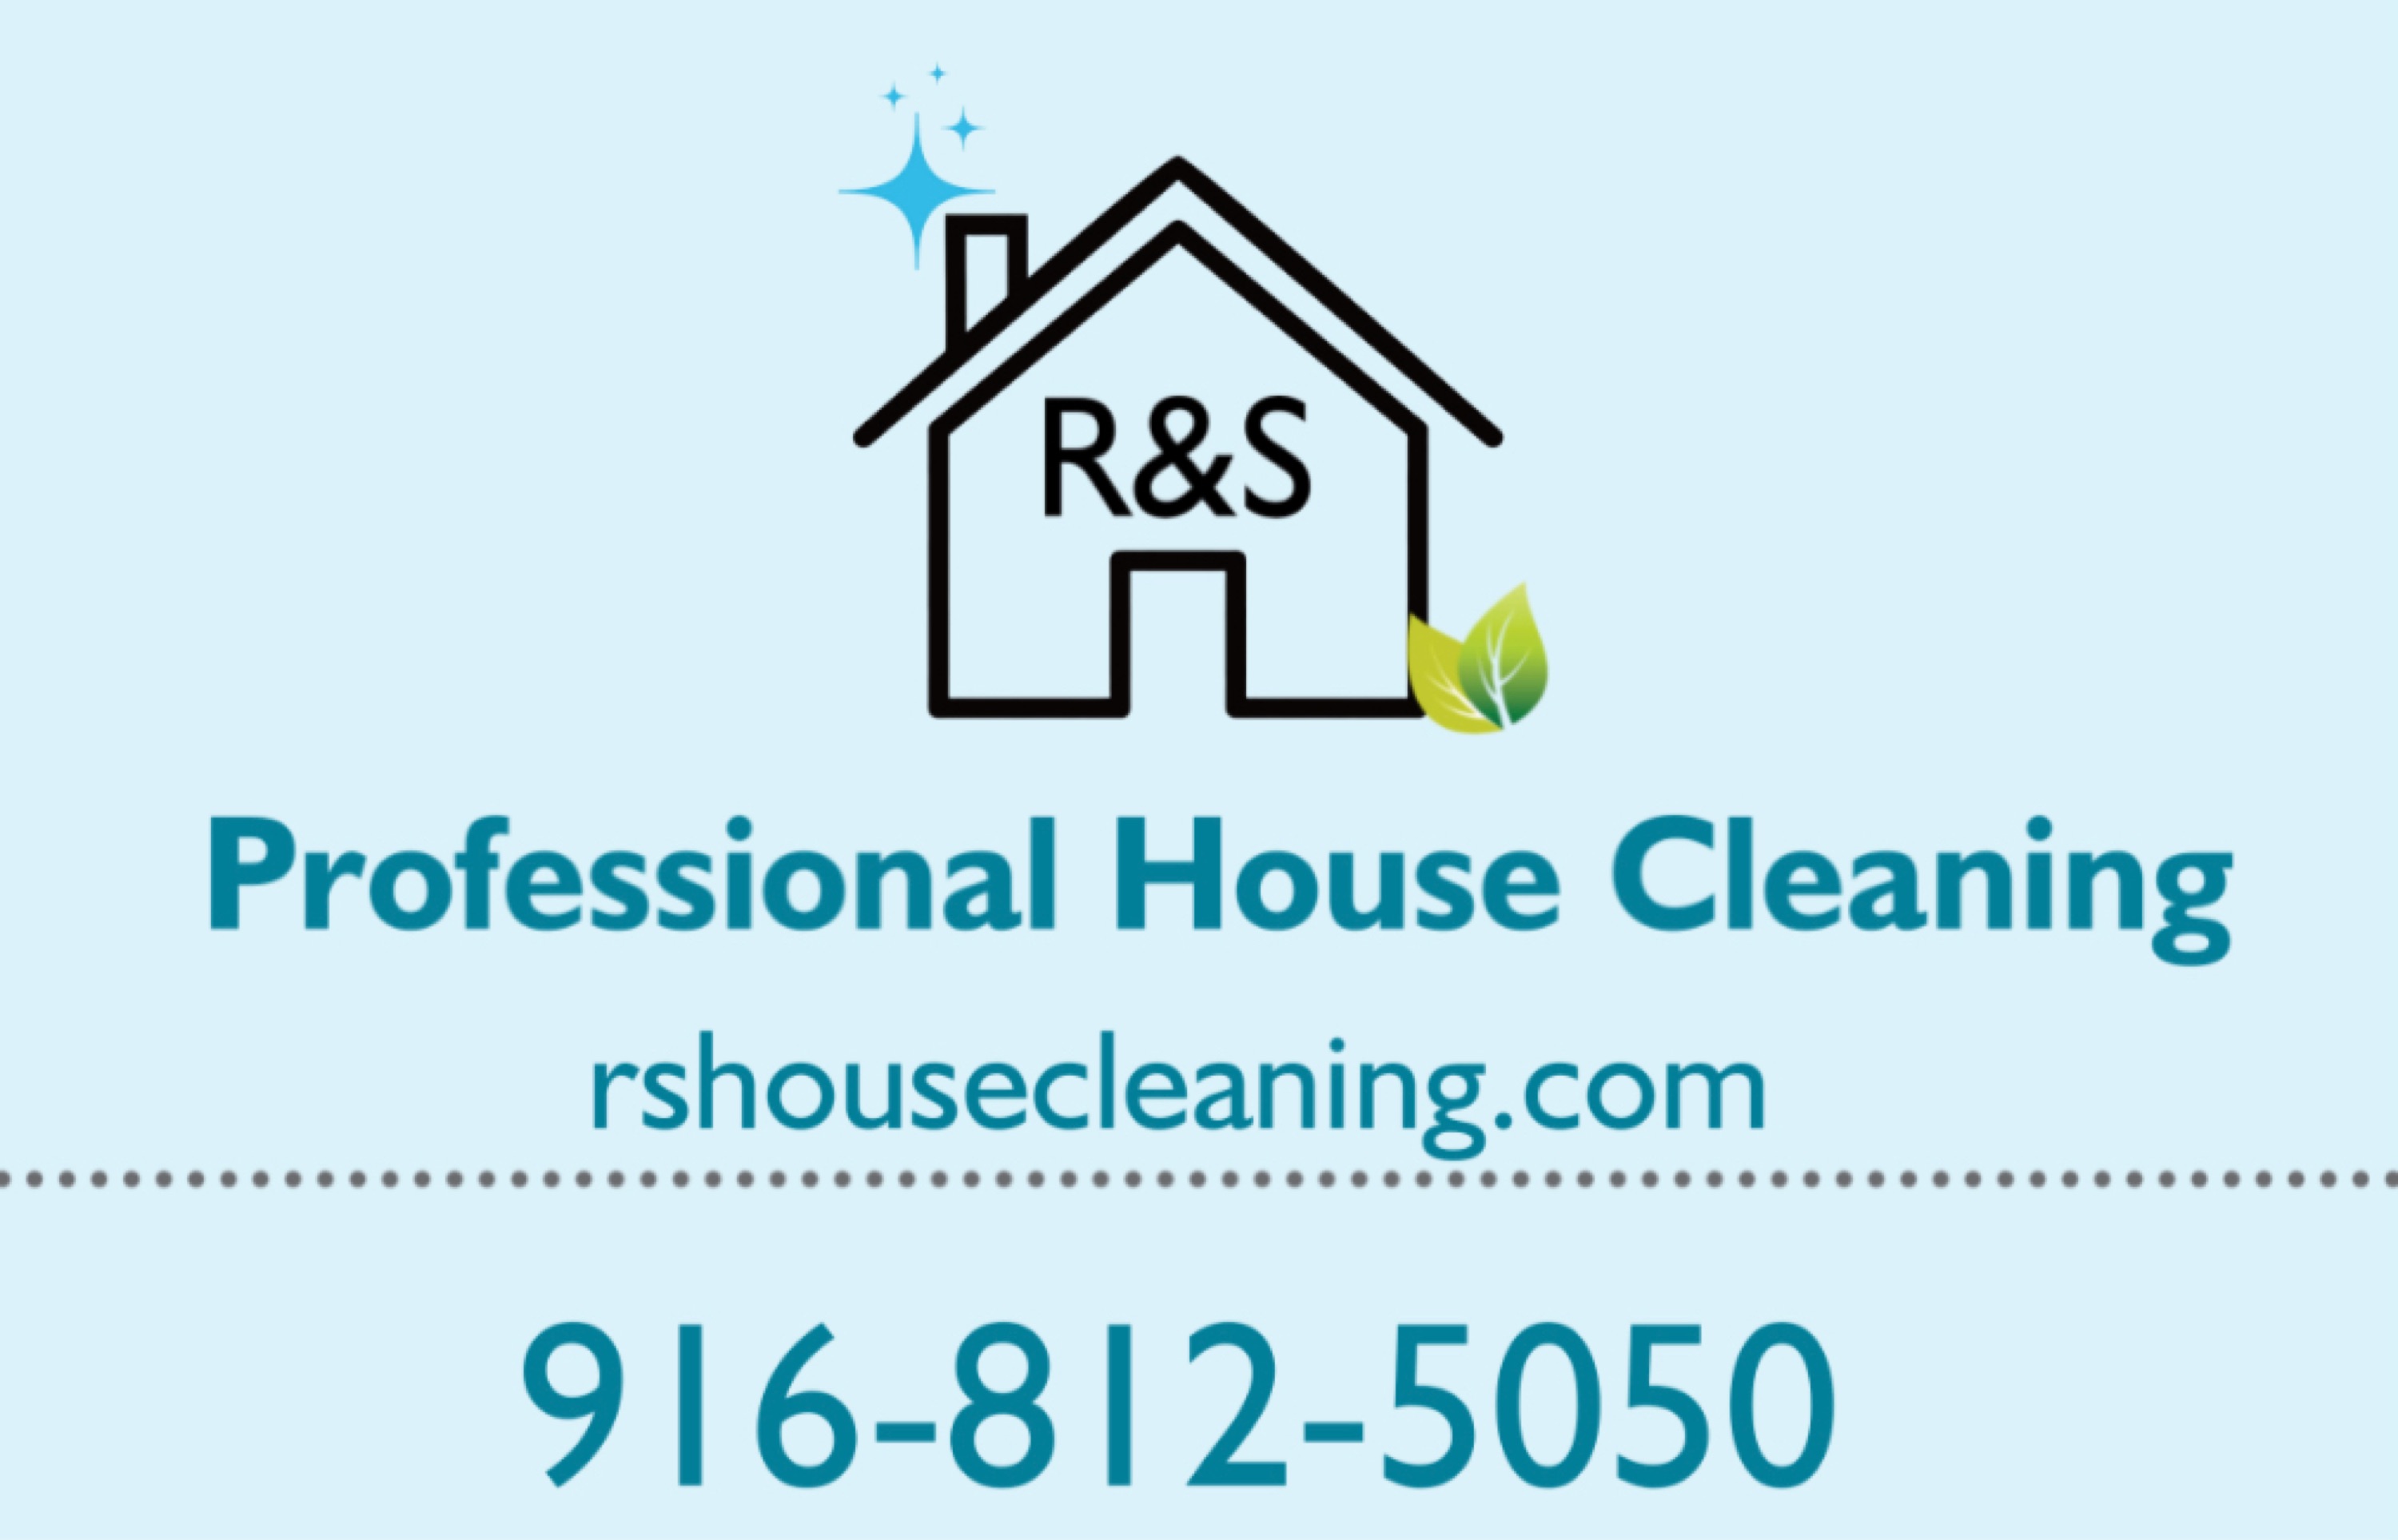 R & S Professional House Cleaning Logo